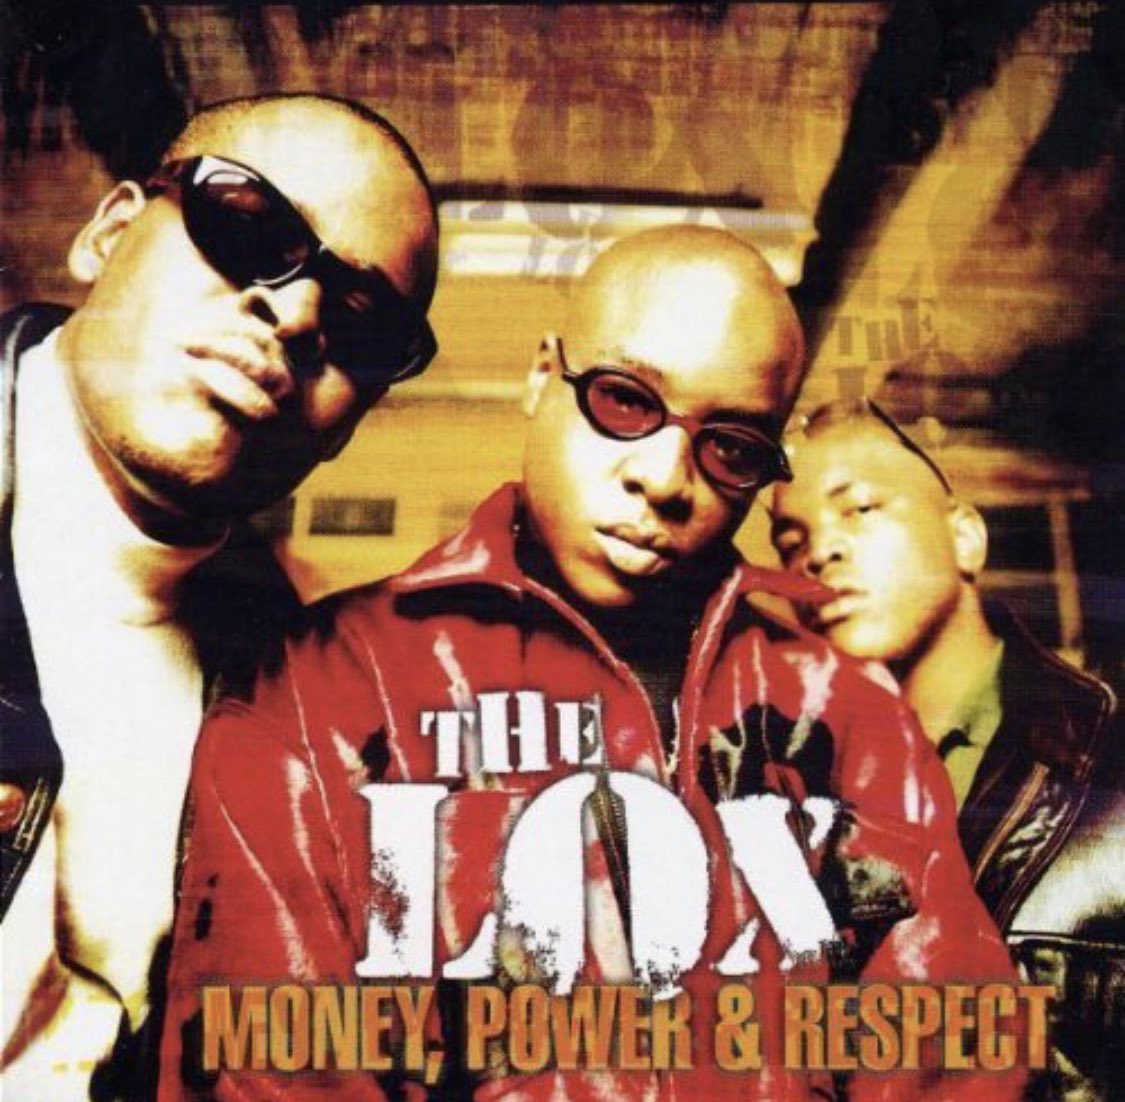 Rap History: The Lox (@thelox) - ‘Money, Power & Respect ’, released January 13, 1998.